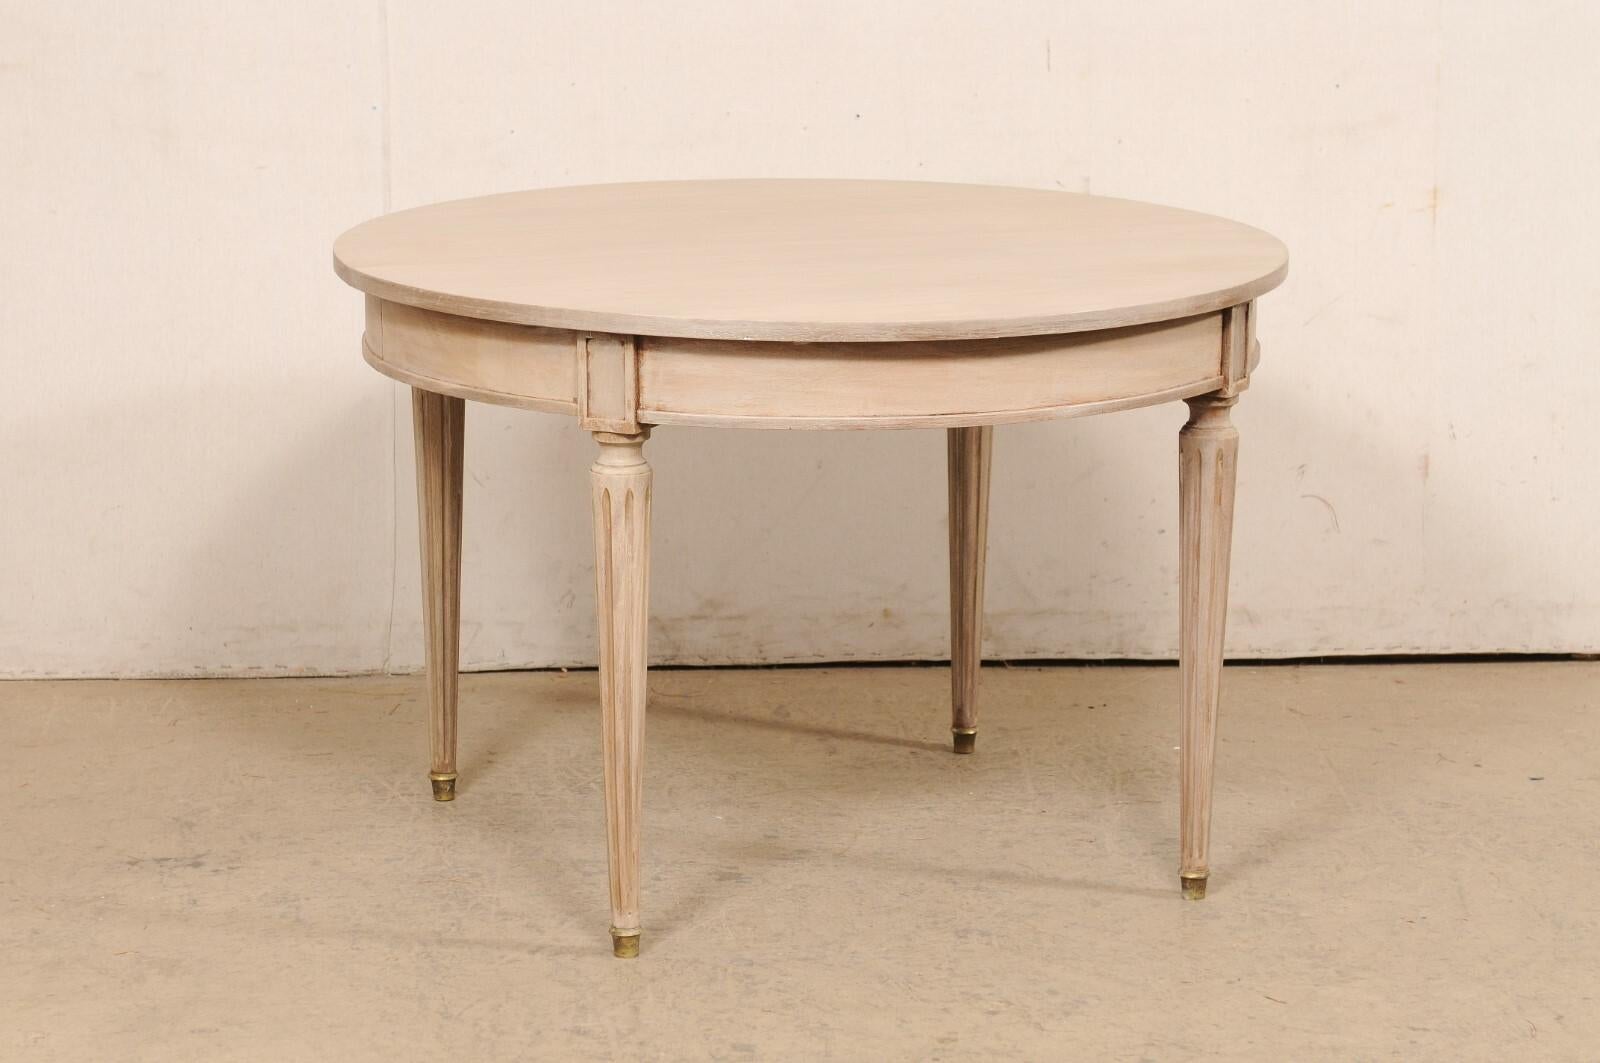 A French painted wood center table from the mid 20th century. This vintage table from France features a circular-shaped top, which slightly overhangs the rounded apron below with cleanly molded skirt and framed rectangular plaques at each knee. The